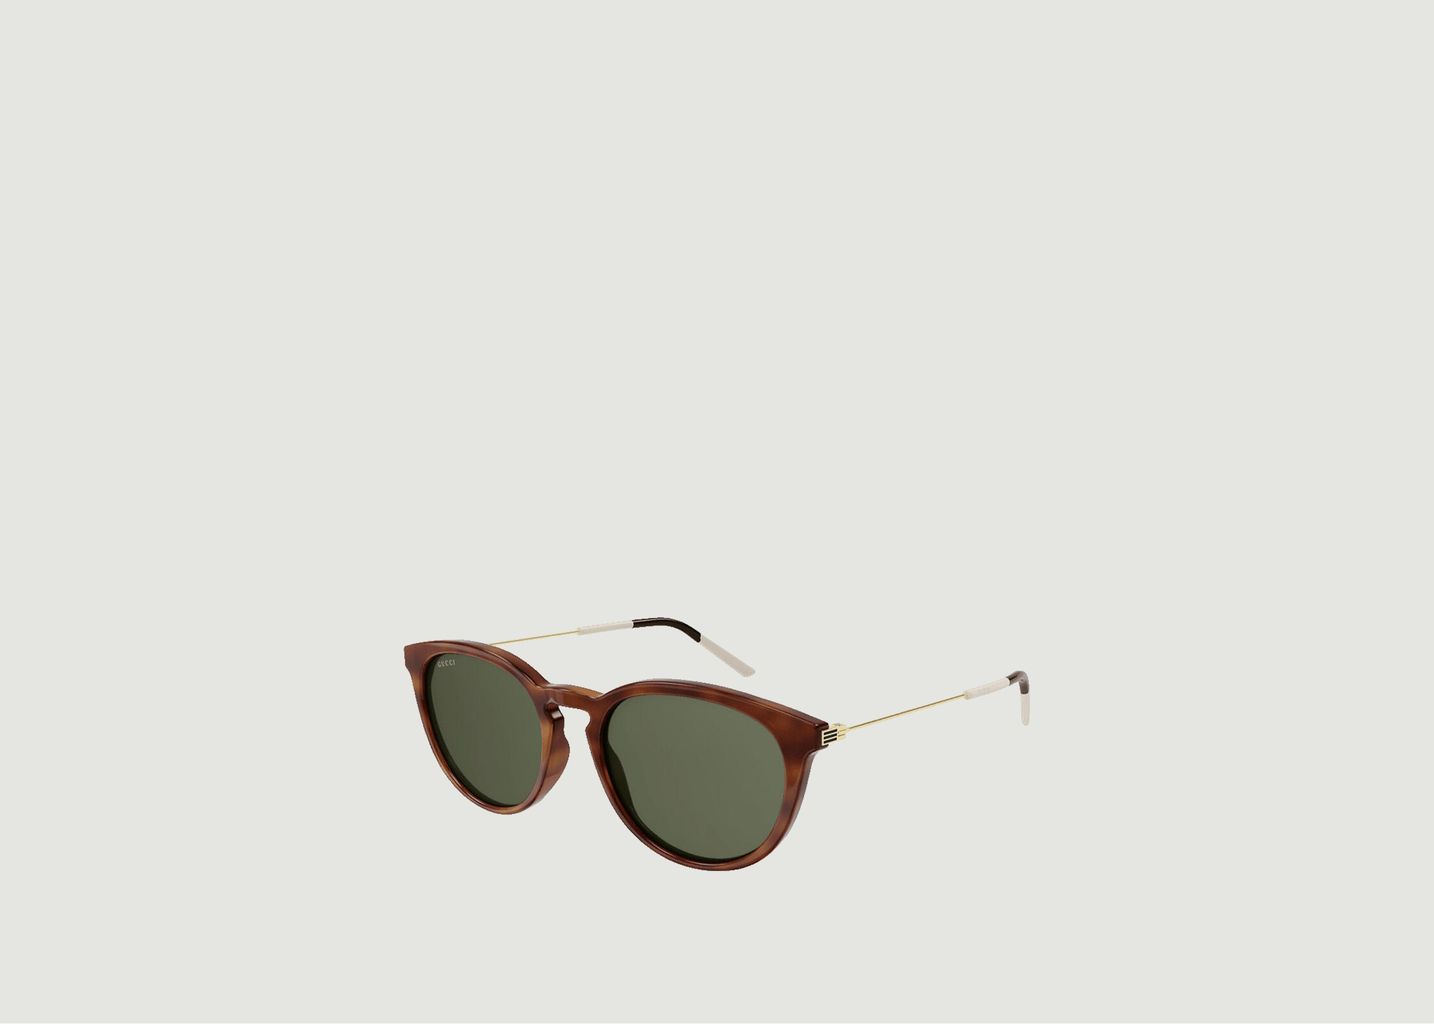 Tortoiseshell sunglasses with colored lenses - Gucci